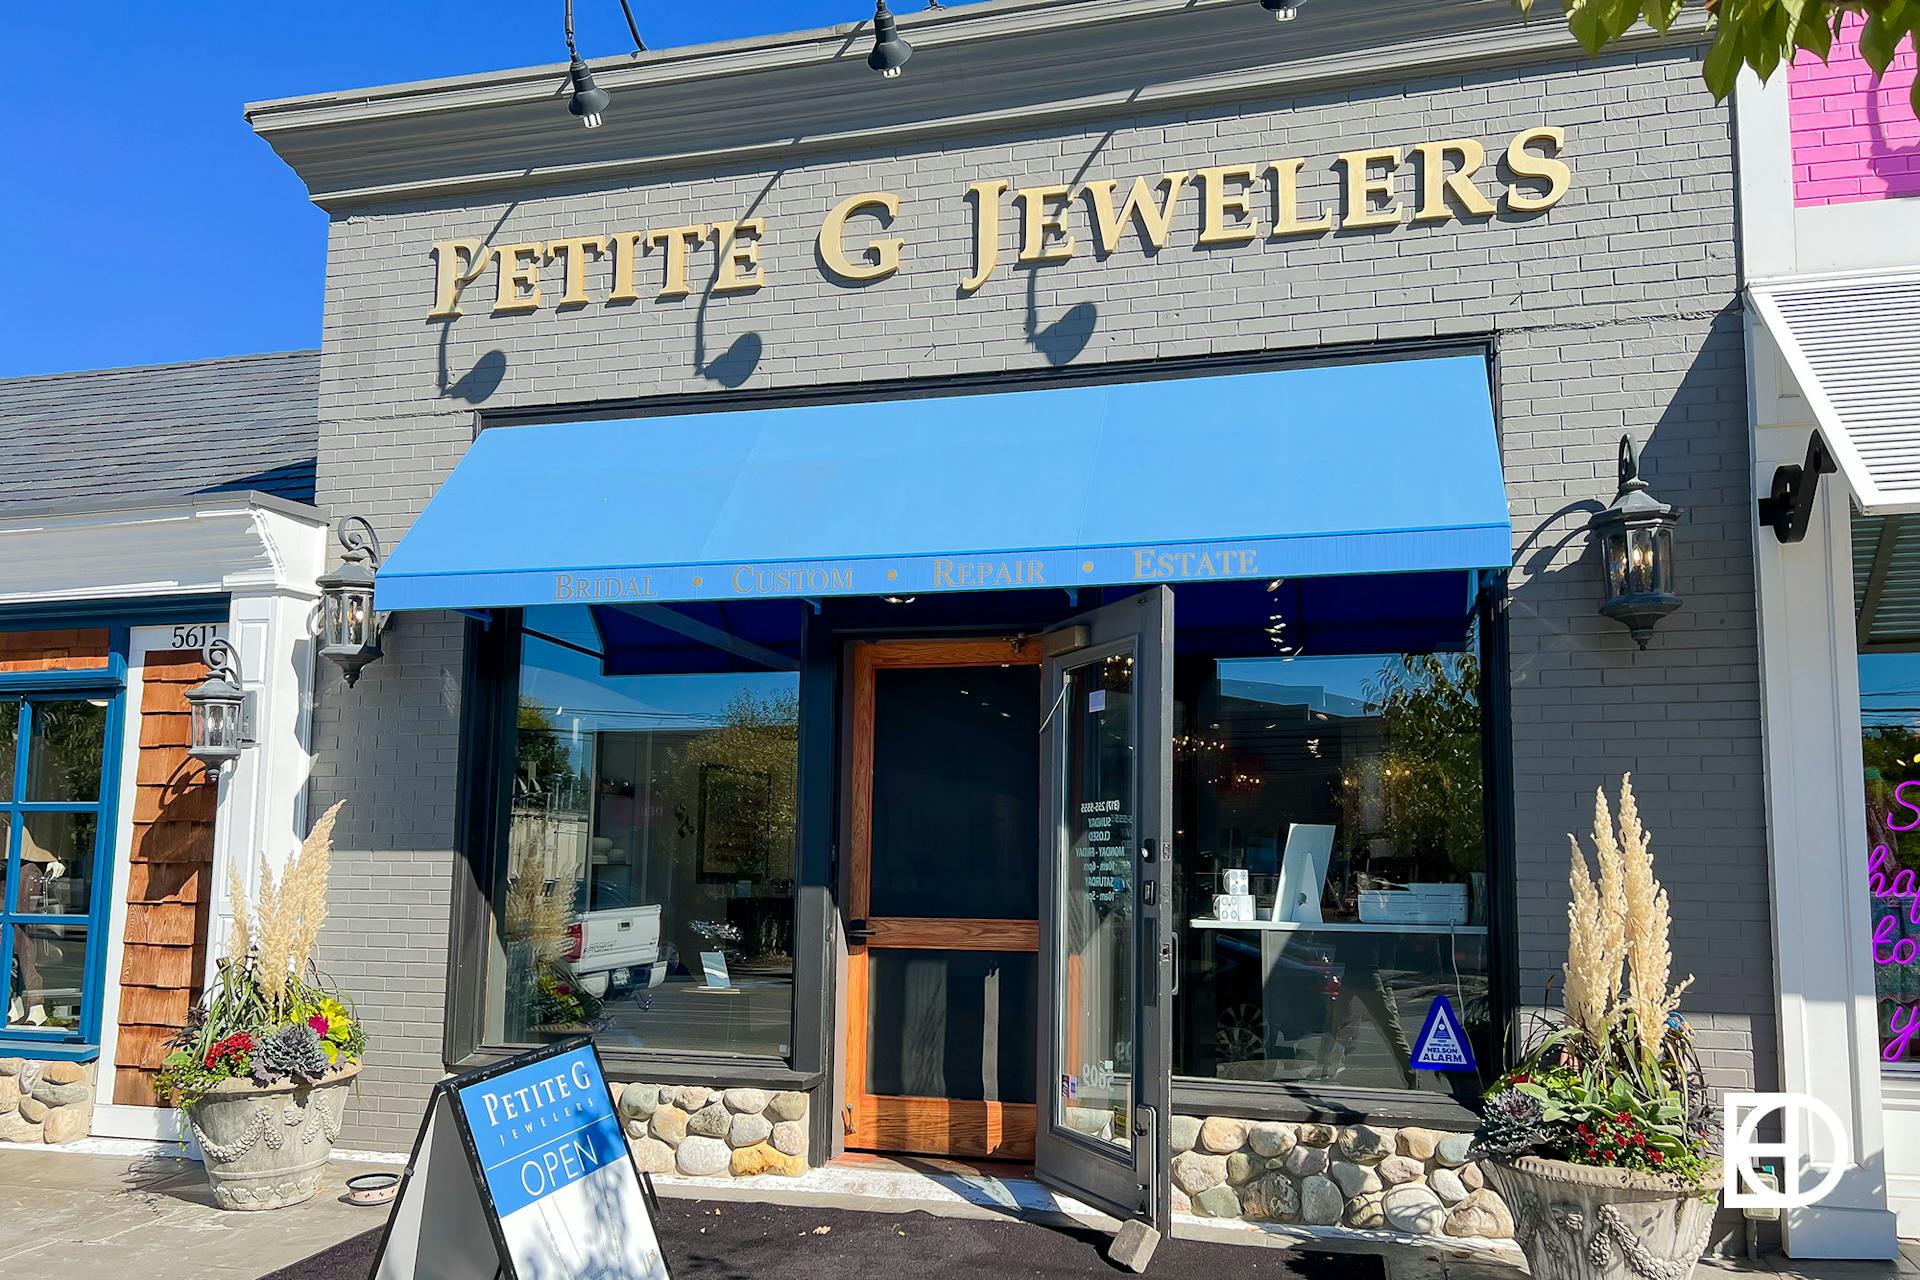 Photo of the exterior of Petite G Jewelers